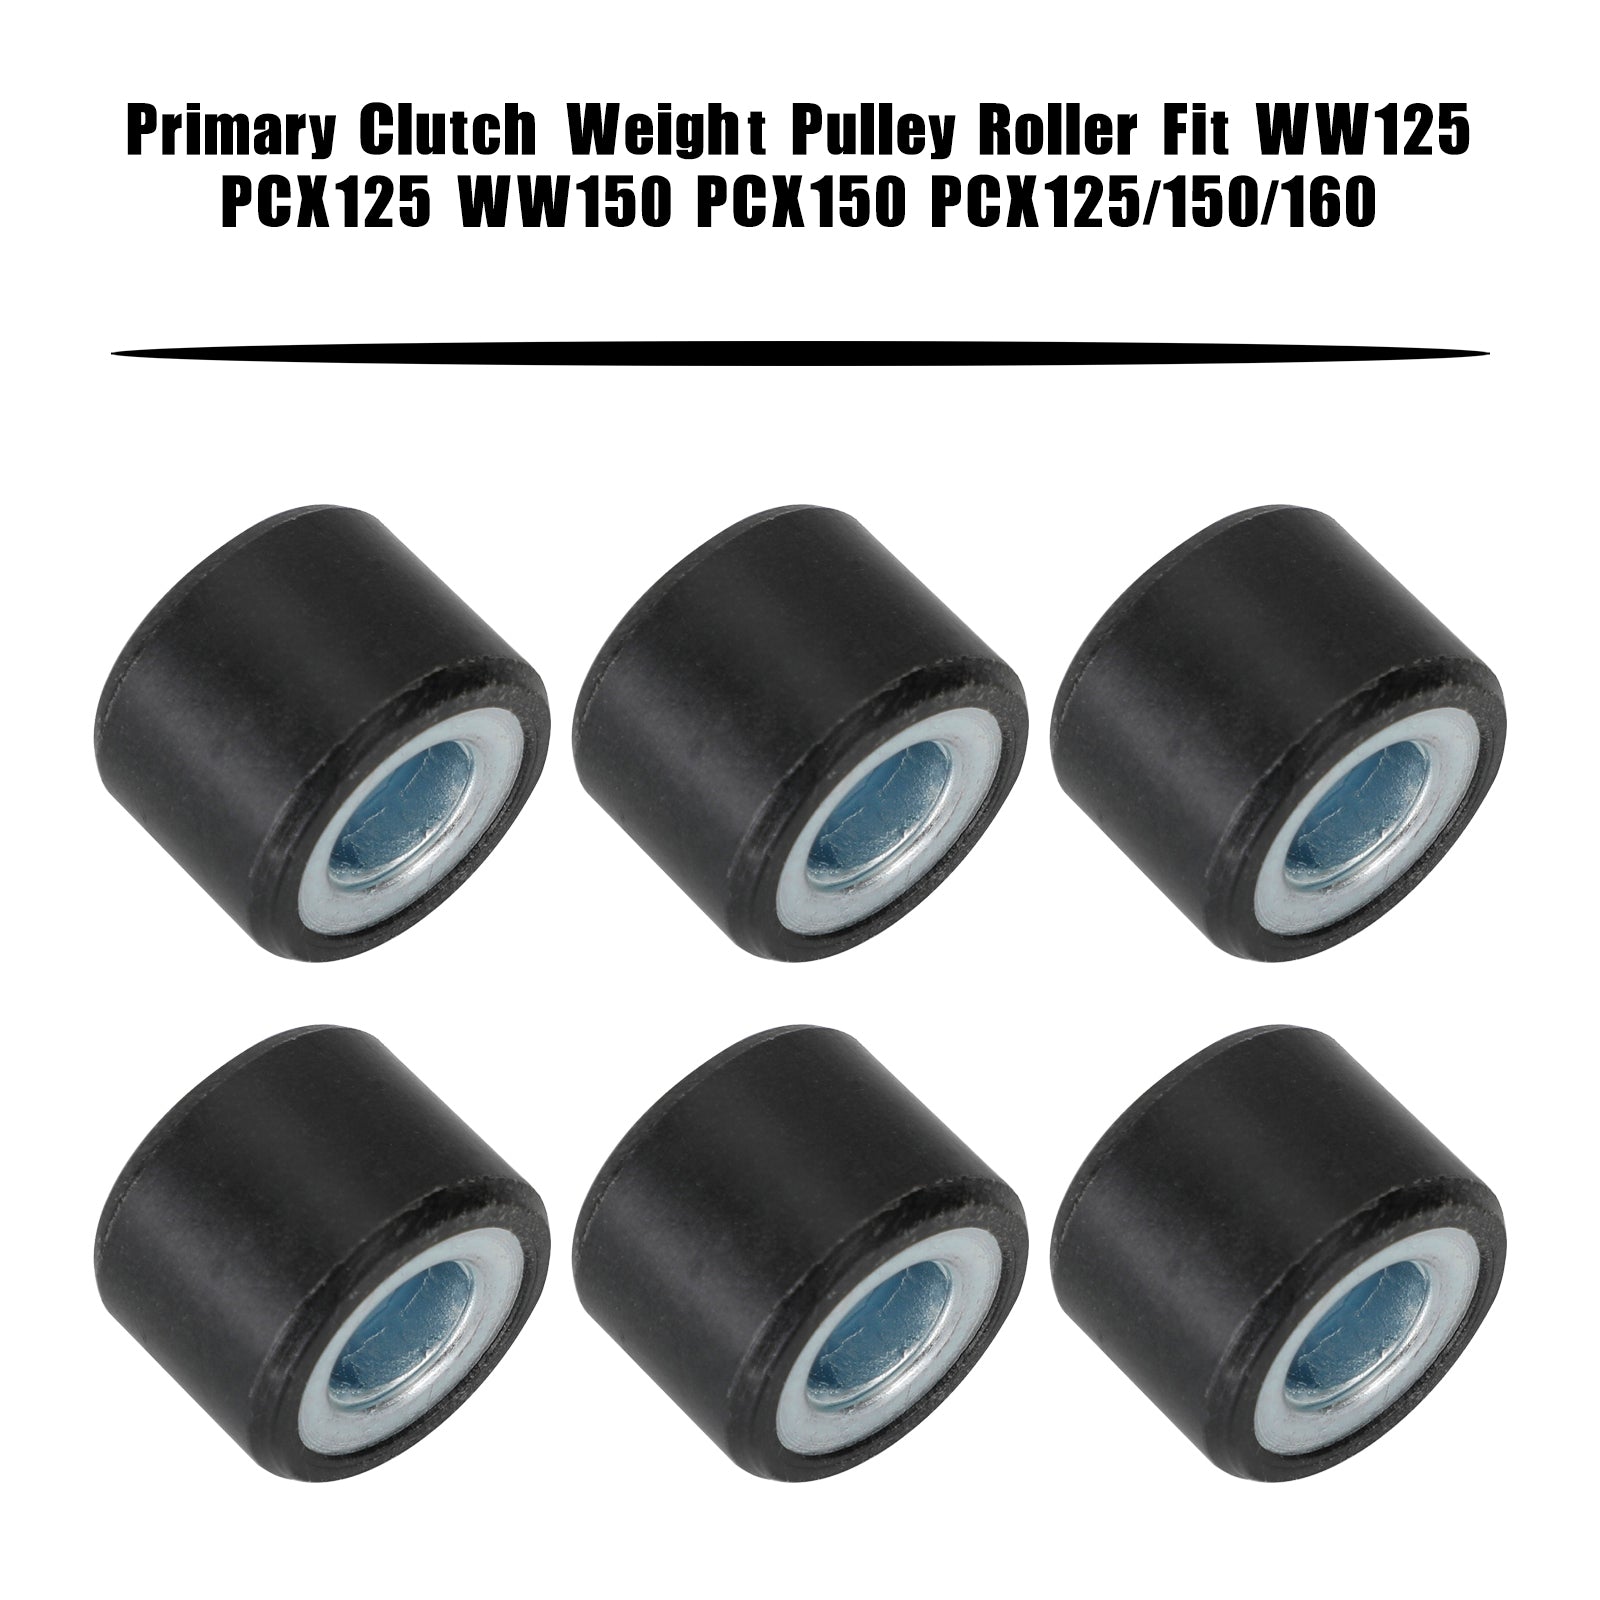 Primary Clutch Weight Pulley Roller Fit For Honda Ww125 Pcx125 Ww150 Pcx150 Pcx125